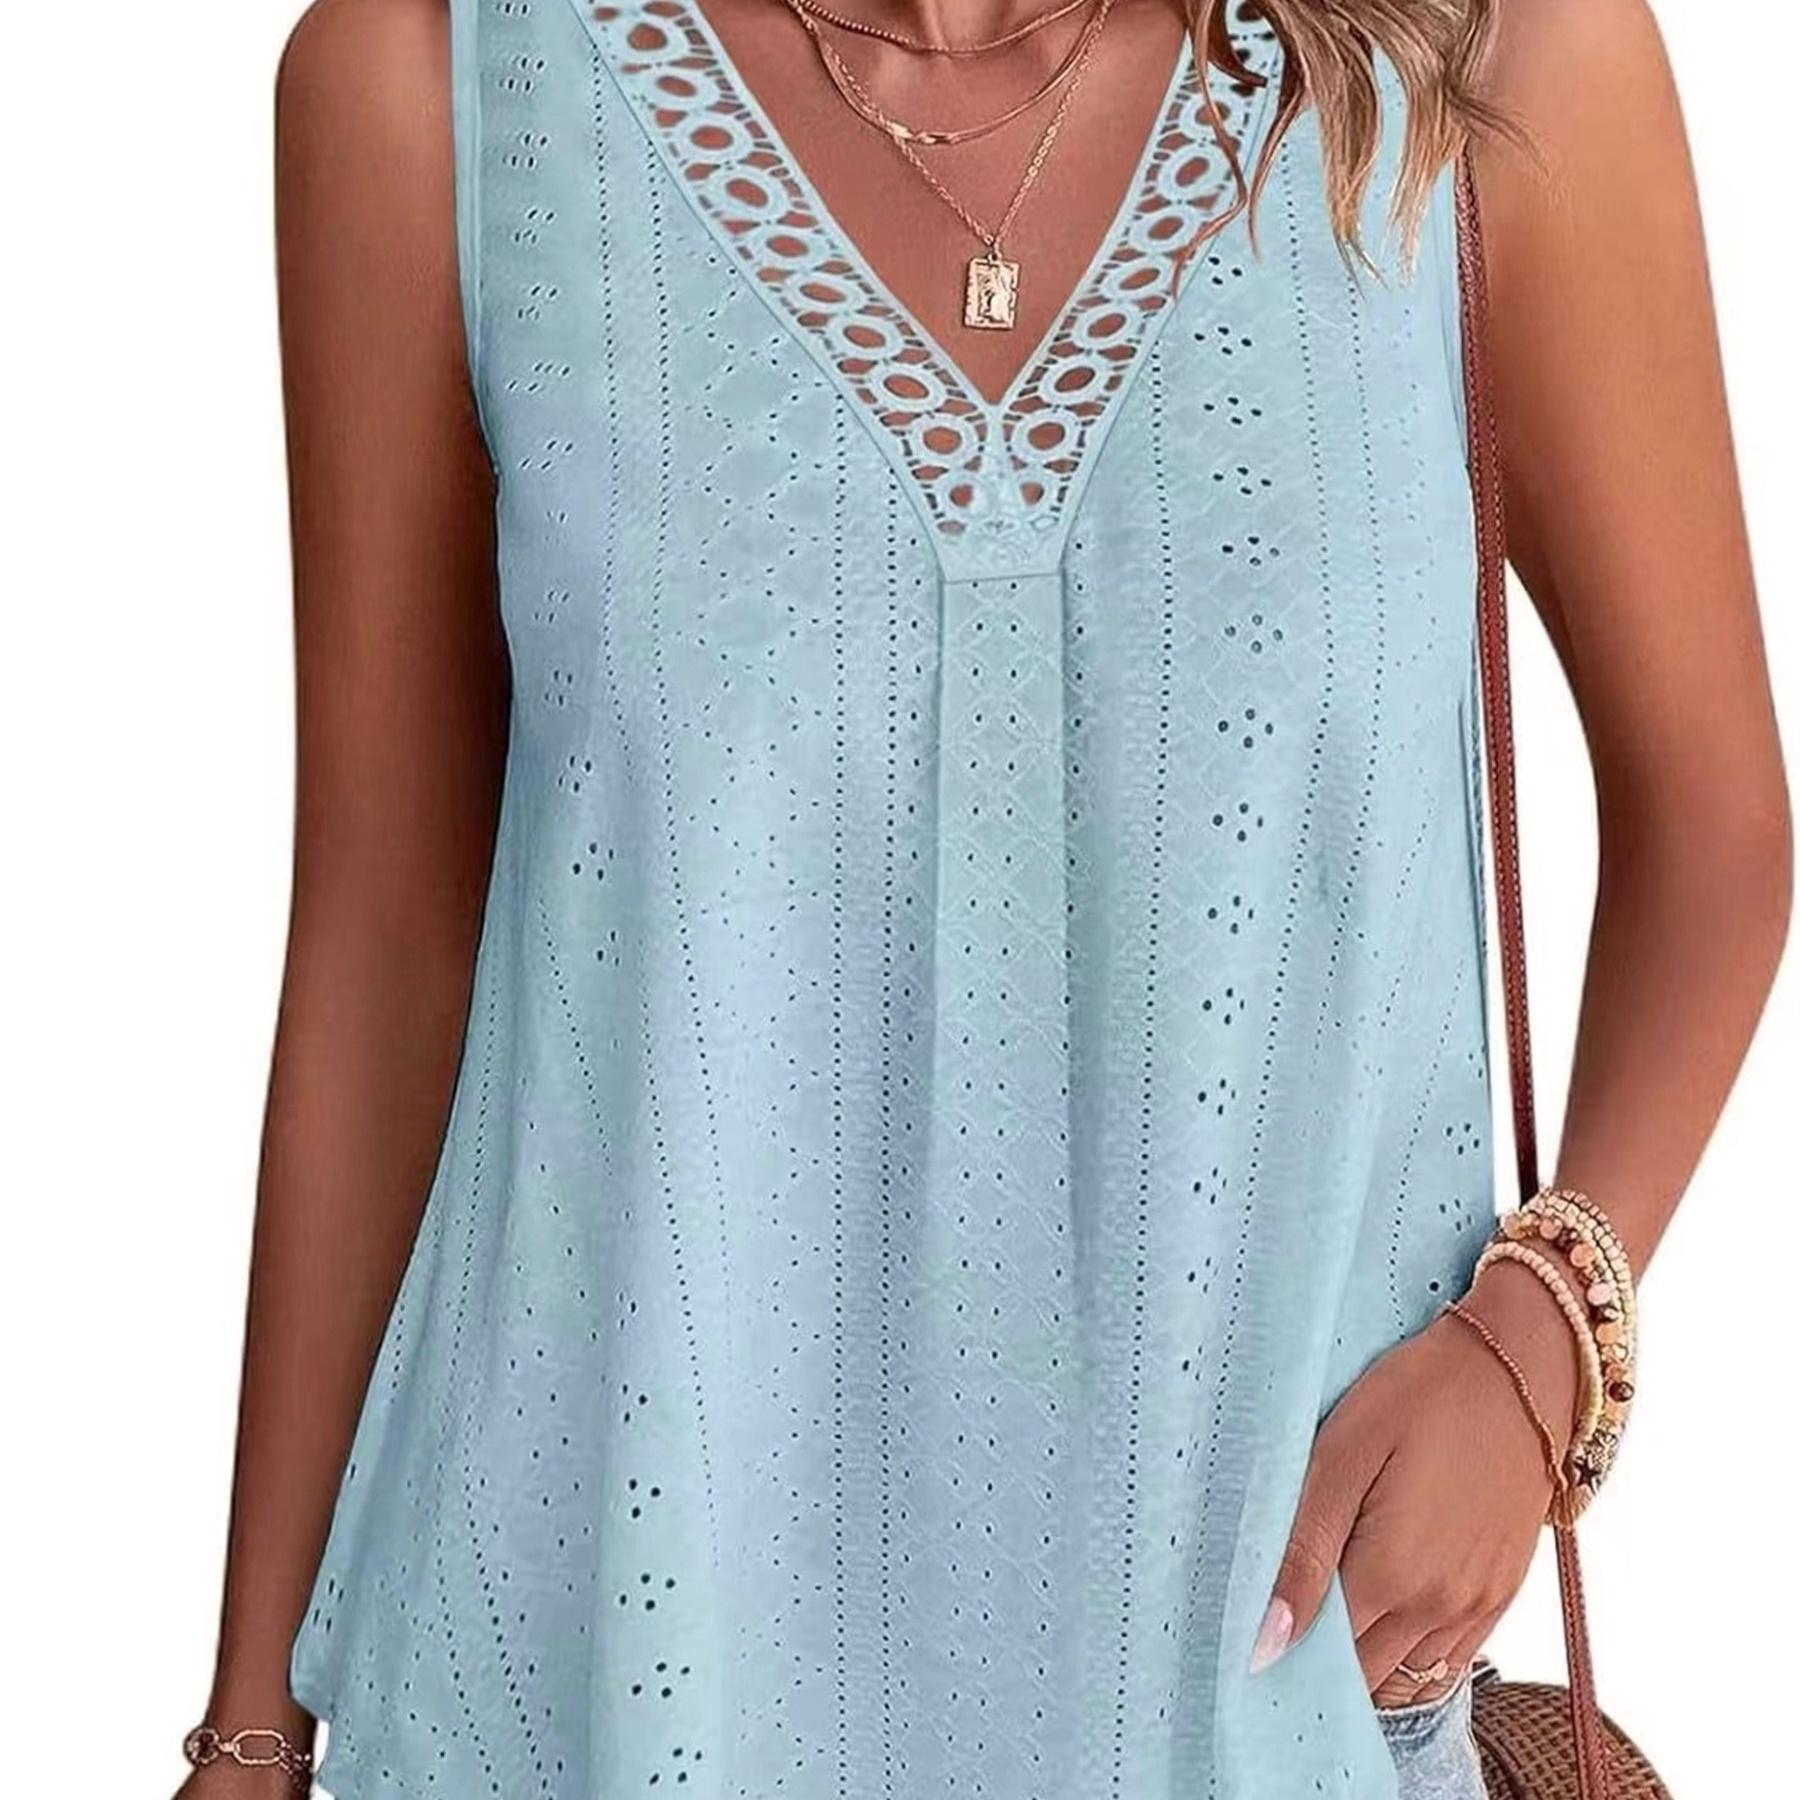 

Plus Size Eyelet Solid Lace Trim Tank Top, Casual V Neck Sleeveless Top For Summer, Women's Plus Size Clothing